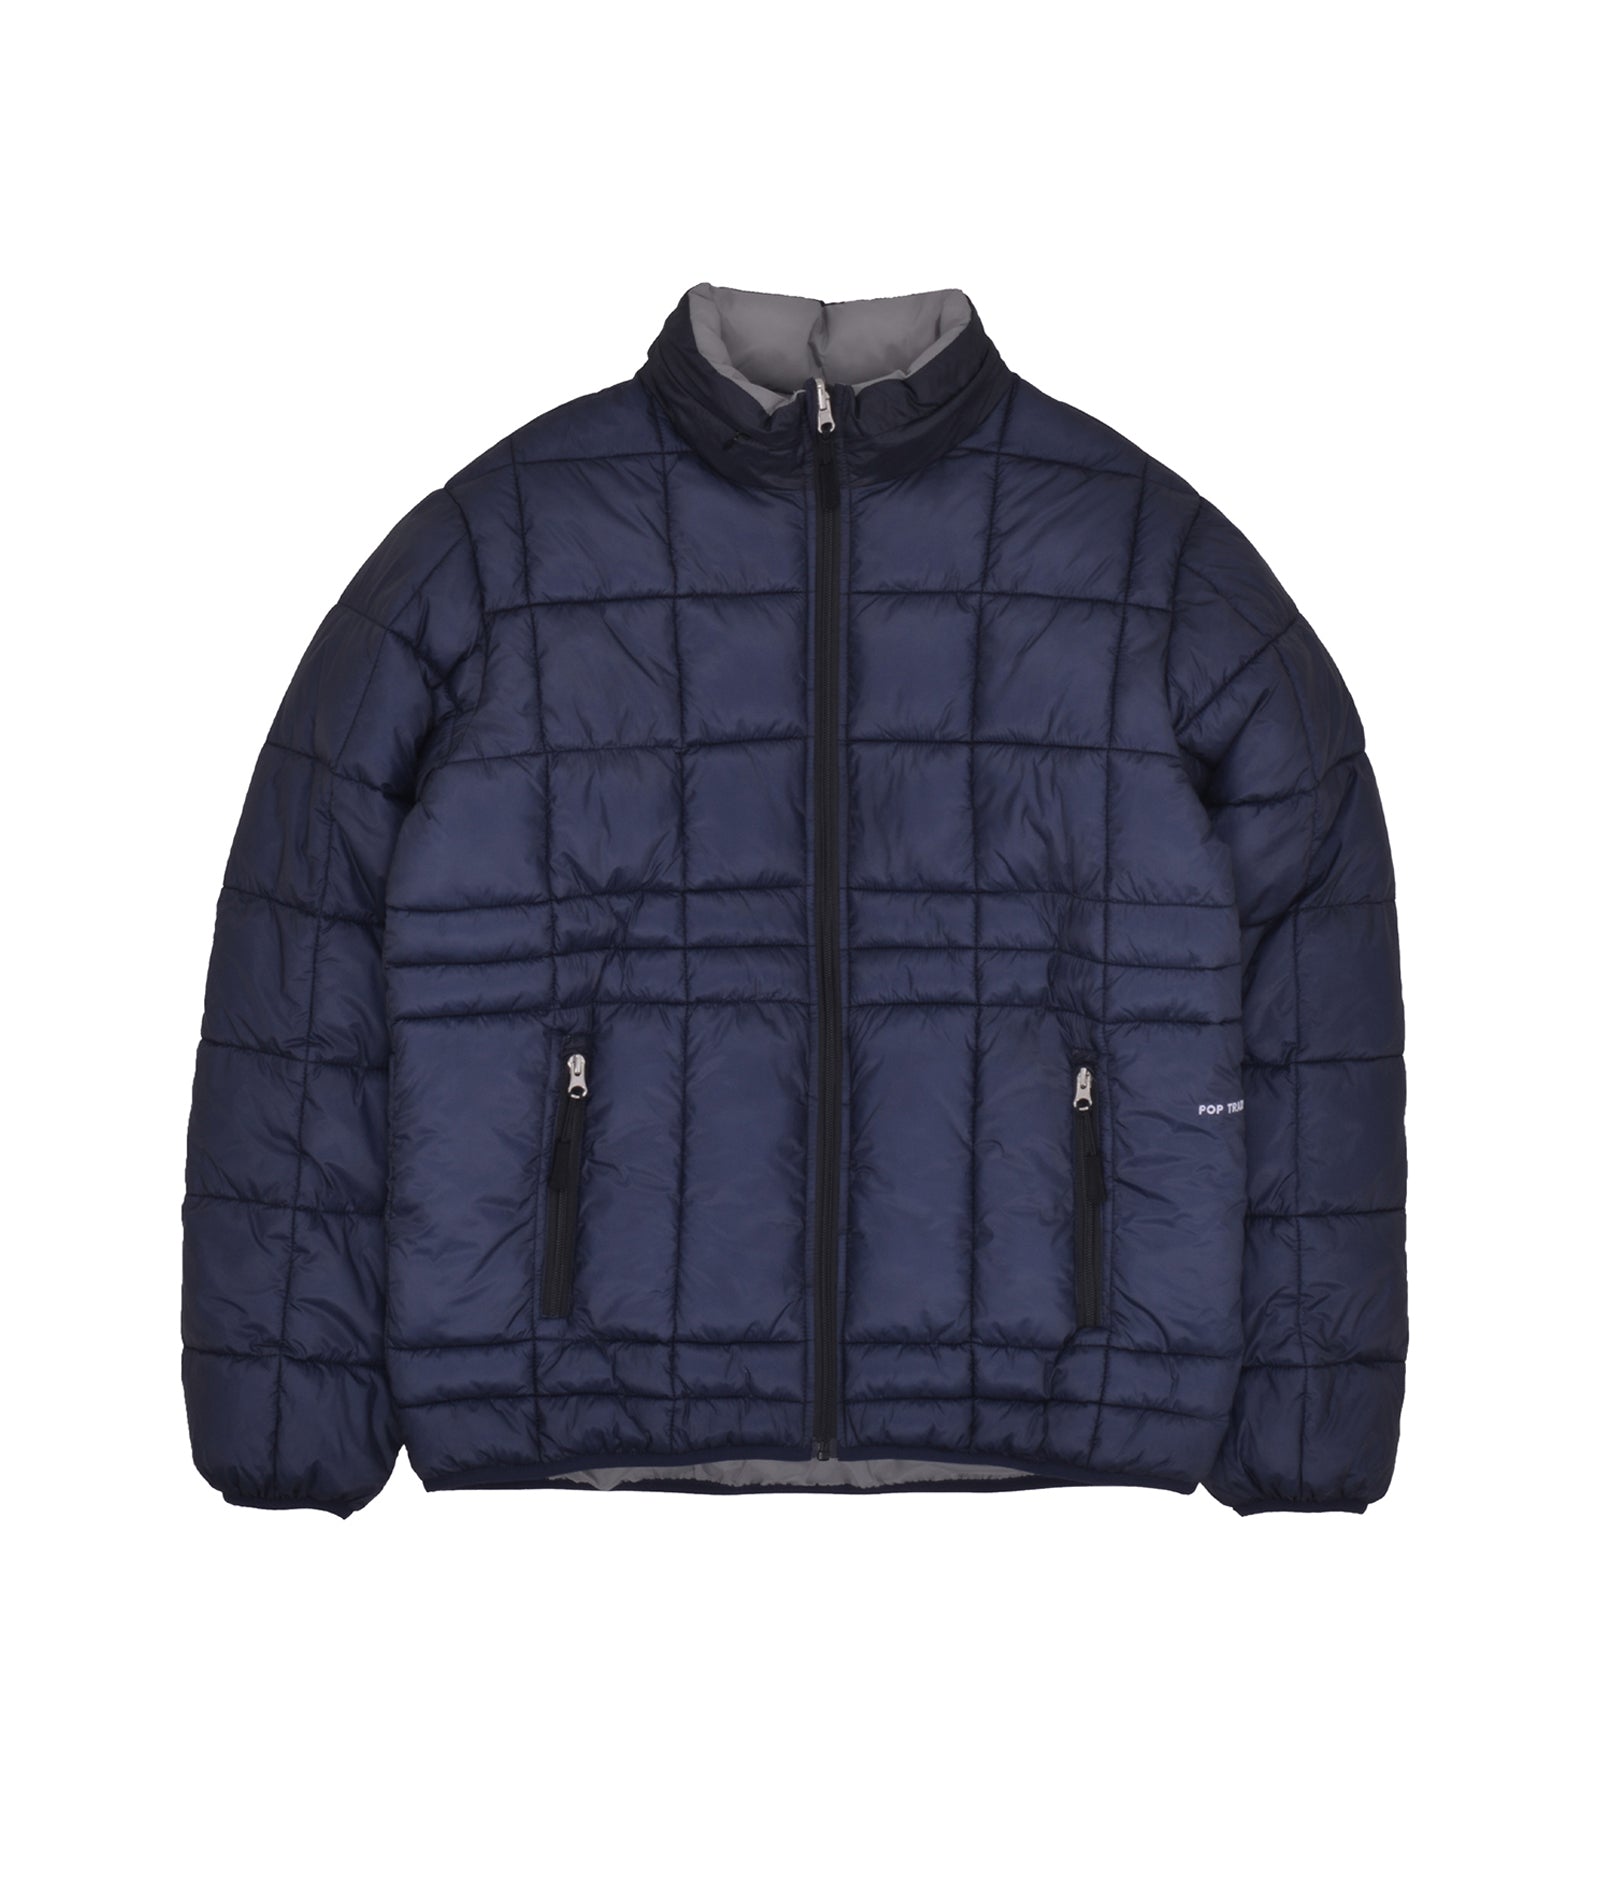 Pop Trading Company - Pop Trading Co - Quilted Reversible Puffer Jacket - Navy/Drizzle